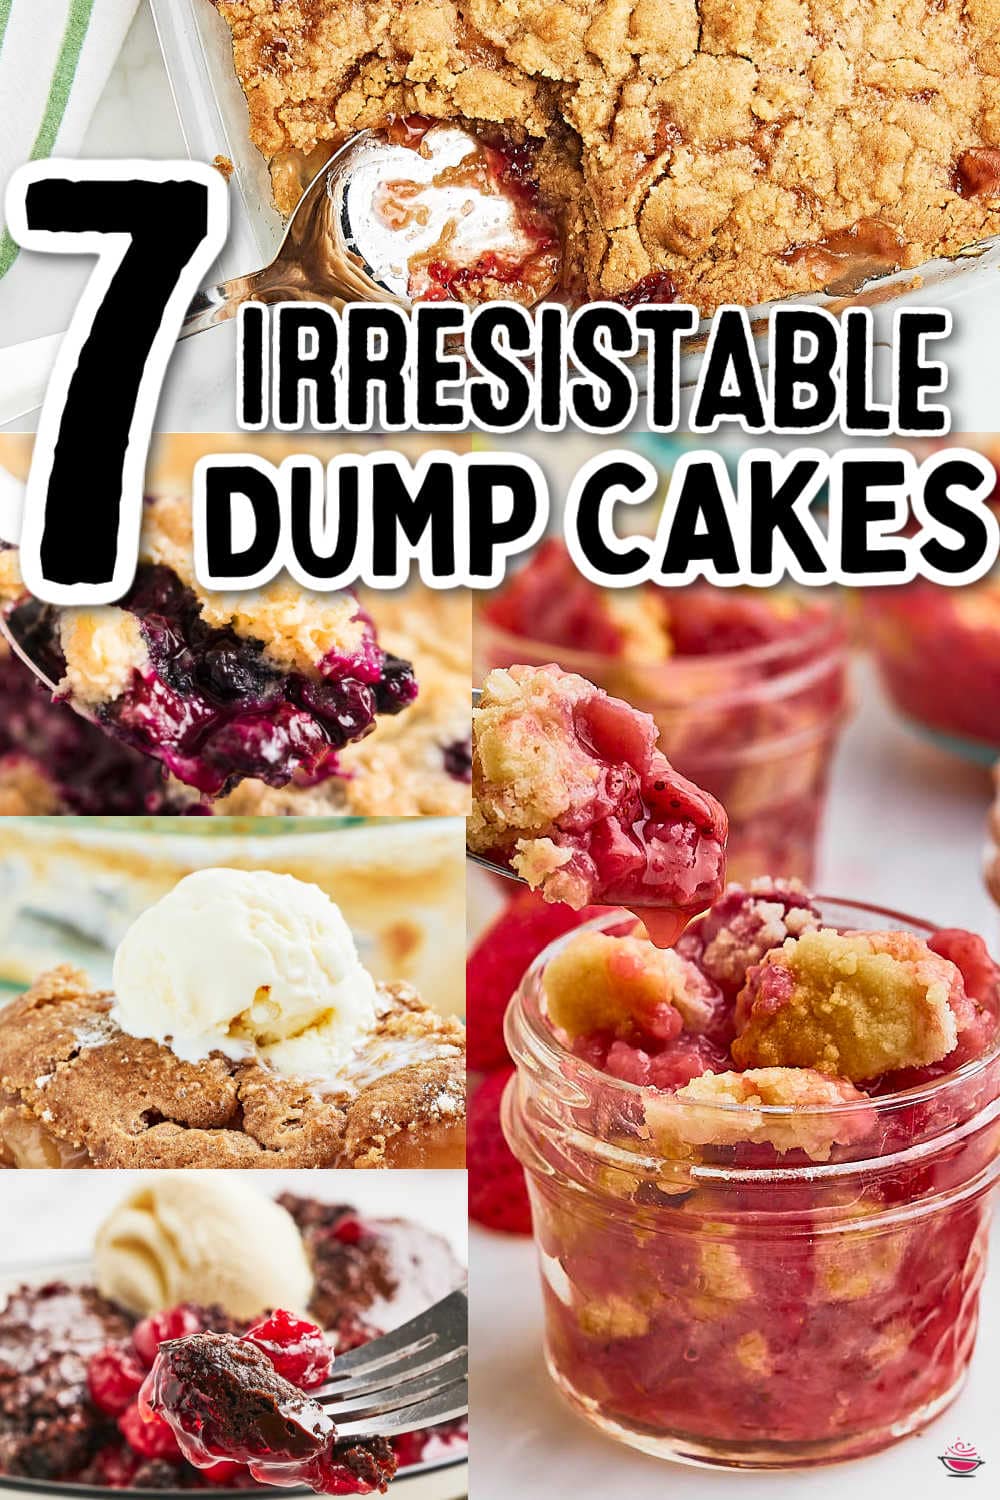 Looking for easy-to-make desserts that everyone will love? Check out these 7 dump cake recipes. Sweet, simple, and sure to impress! #dumpcakes #easydesserts #dessertideas #blueberrydumpcake #christmasdumpcake via @cheerfulcook